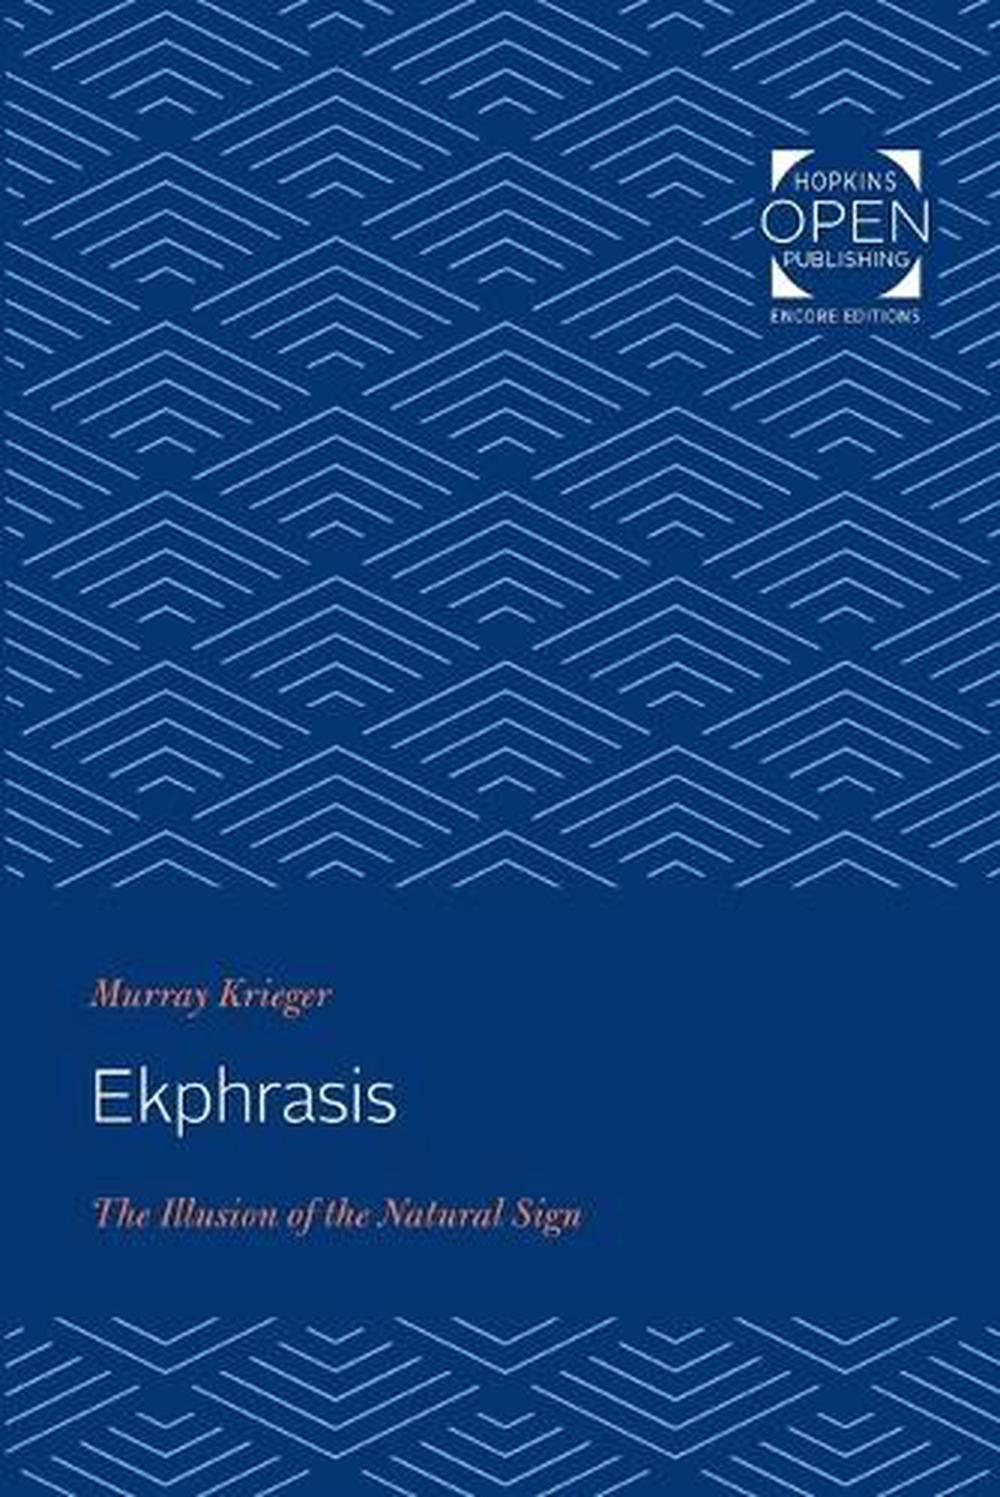 Ekphrasis The Illusion of the Natural Sign by Murray Krieger Paperback